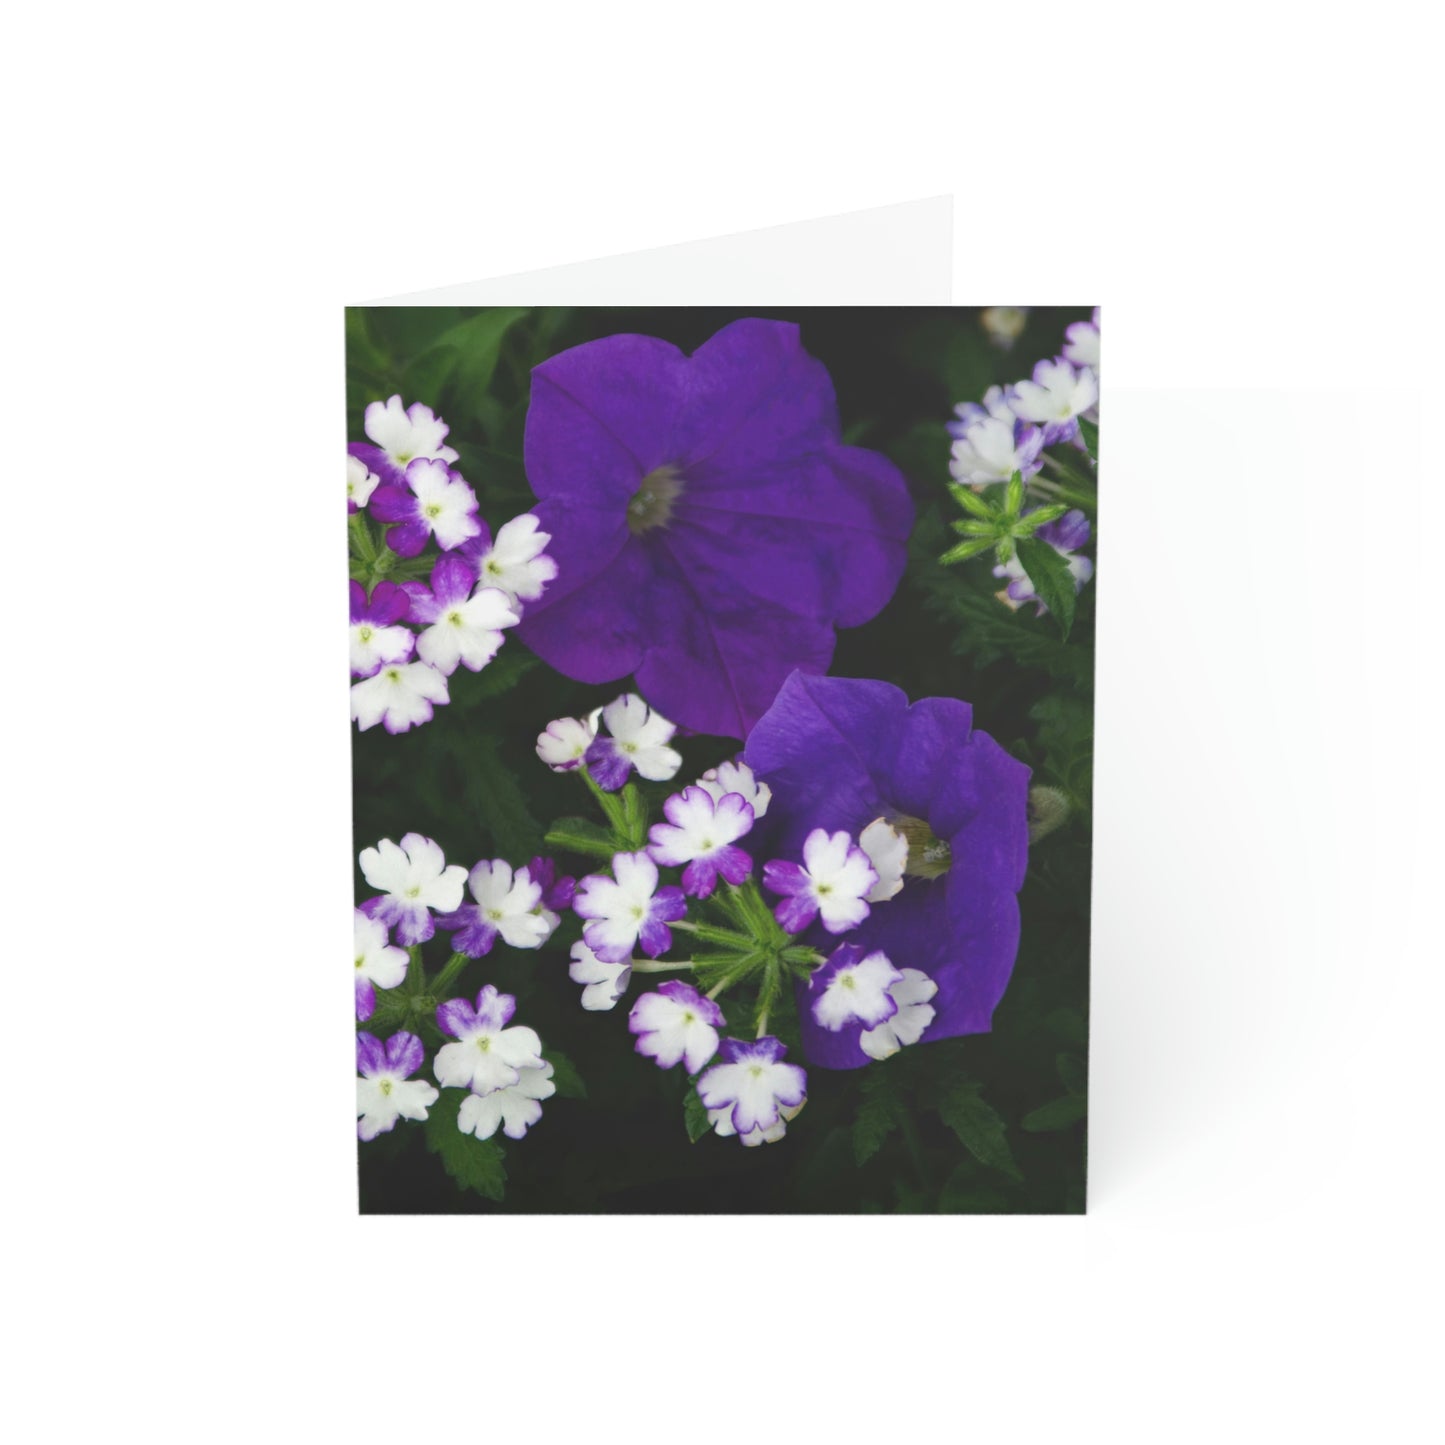 Flowers 04 Greeting Cards (1, 10, 30, and 50pcs)